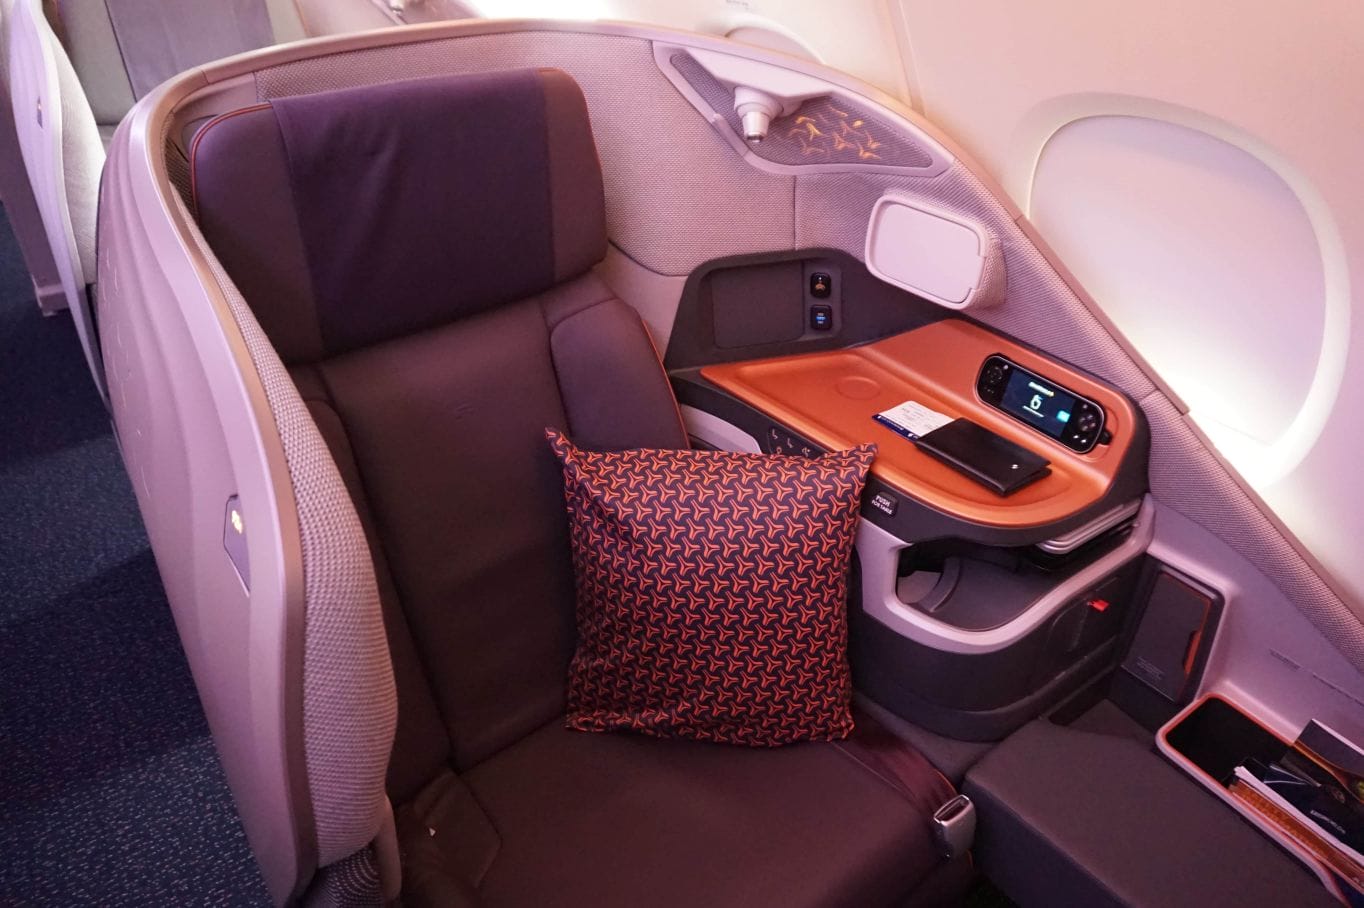 singapore airlines travel alerts